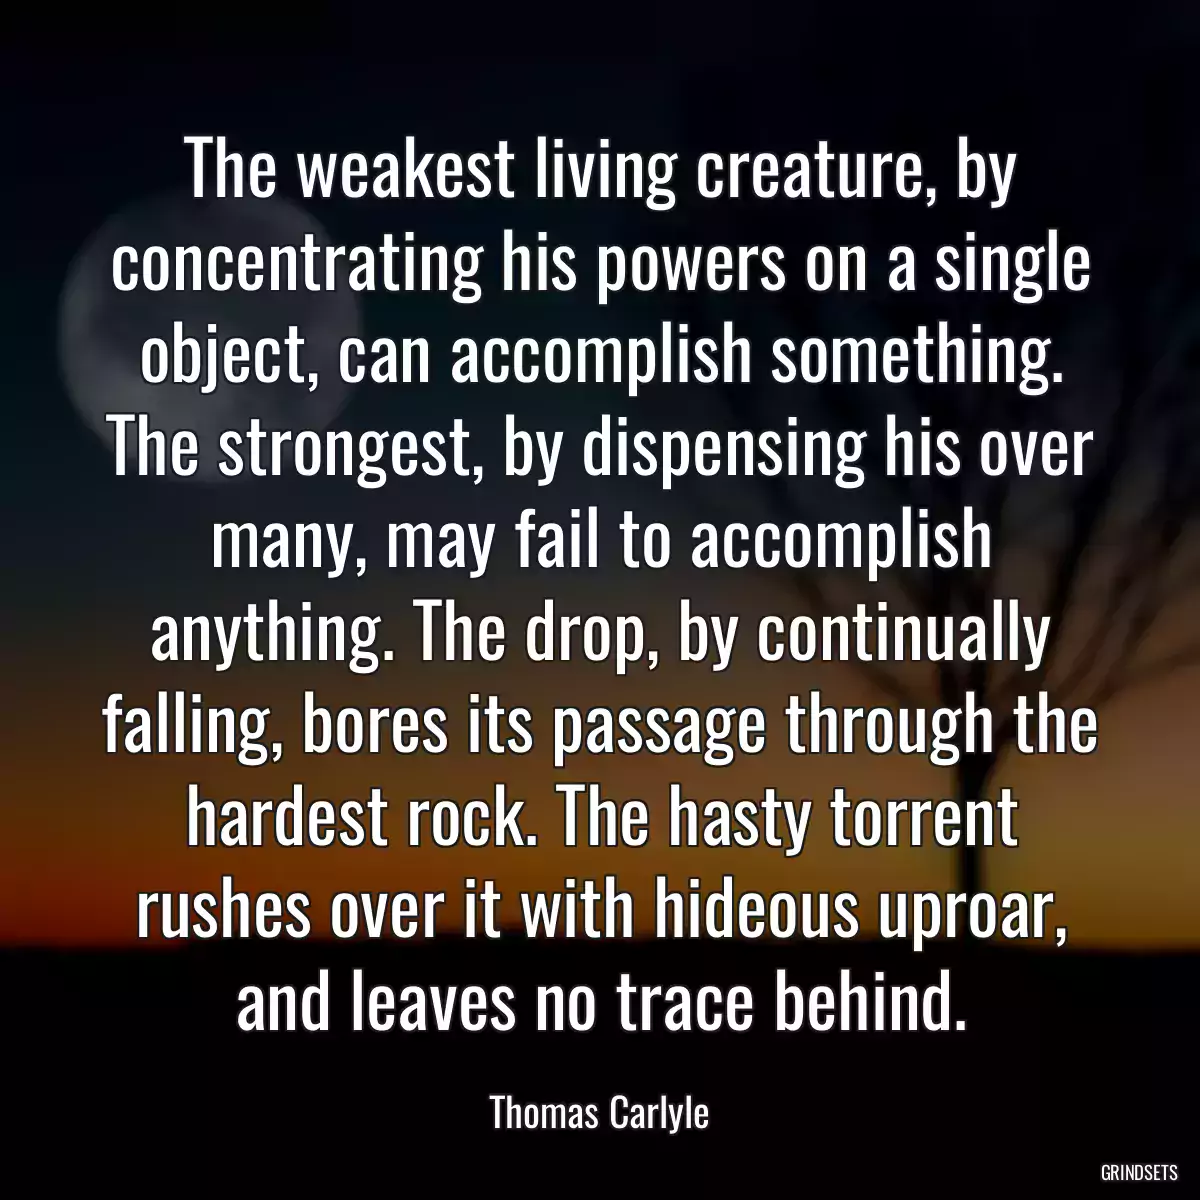 The weakest living creature, by concentrating his powers on a single object, can accomplish something. The strongest, by dispensing his over many, may fail to accomplish anything. The drop, by continually falling, bores its passage through the hardest rock. The hasty torrent rushes over it with hideous uproar, and leaves no trace behind.